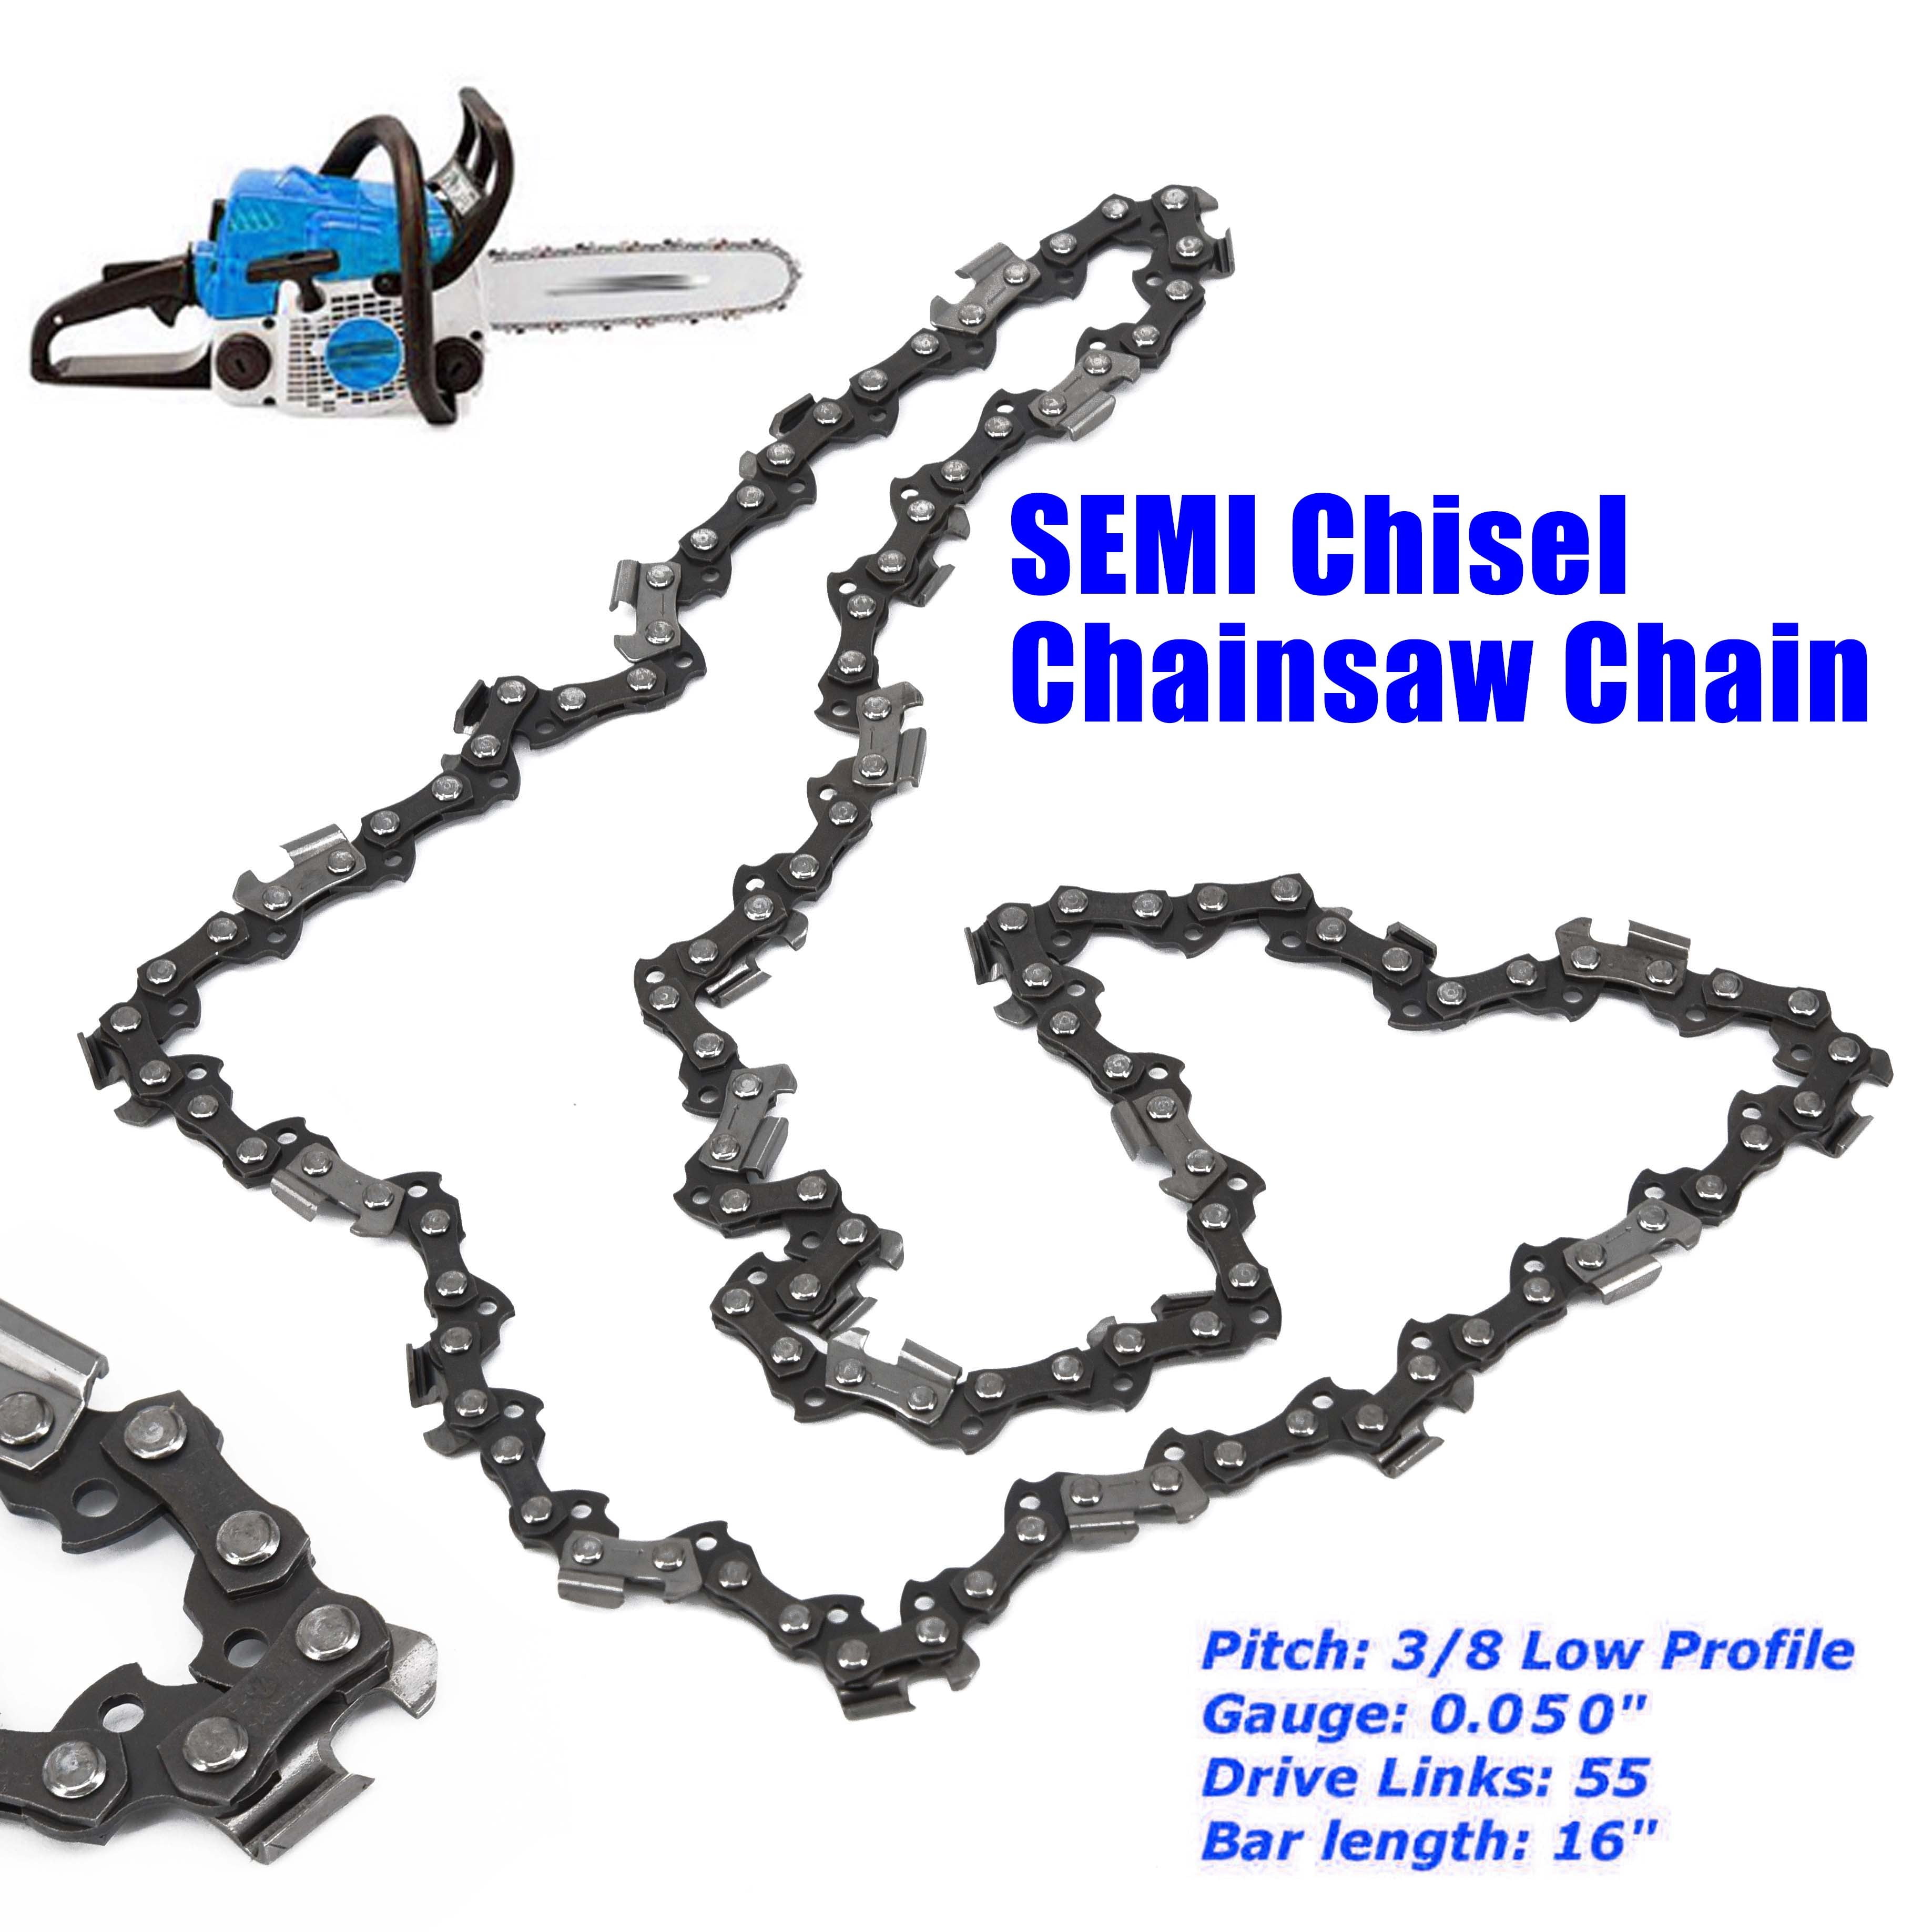 16-Inch Full Chisel 56 Drive Links Chainsaw Chain 3/8" Gauge W2C4 .050" F5O2 